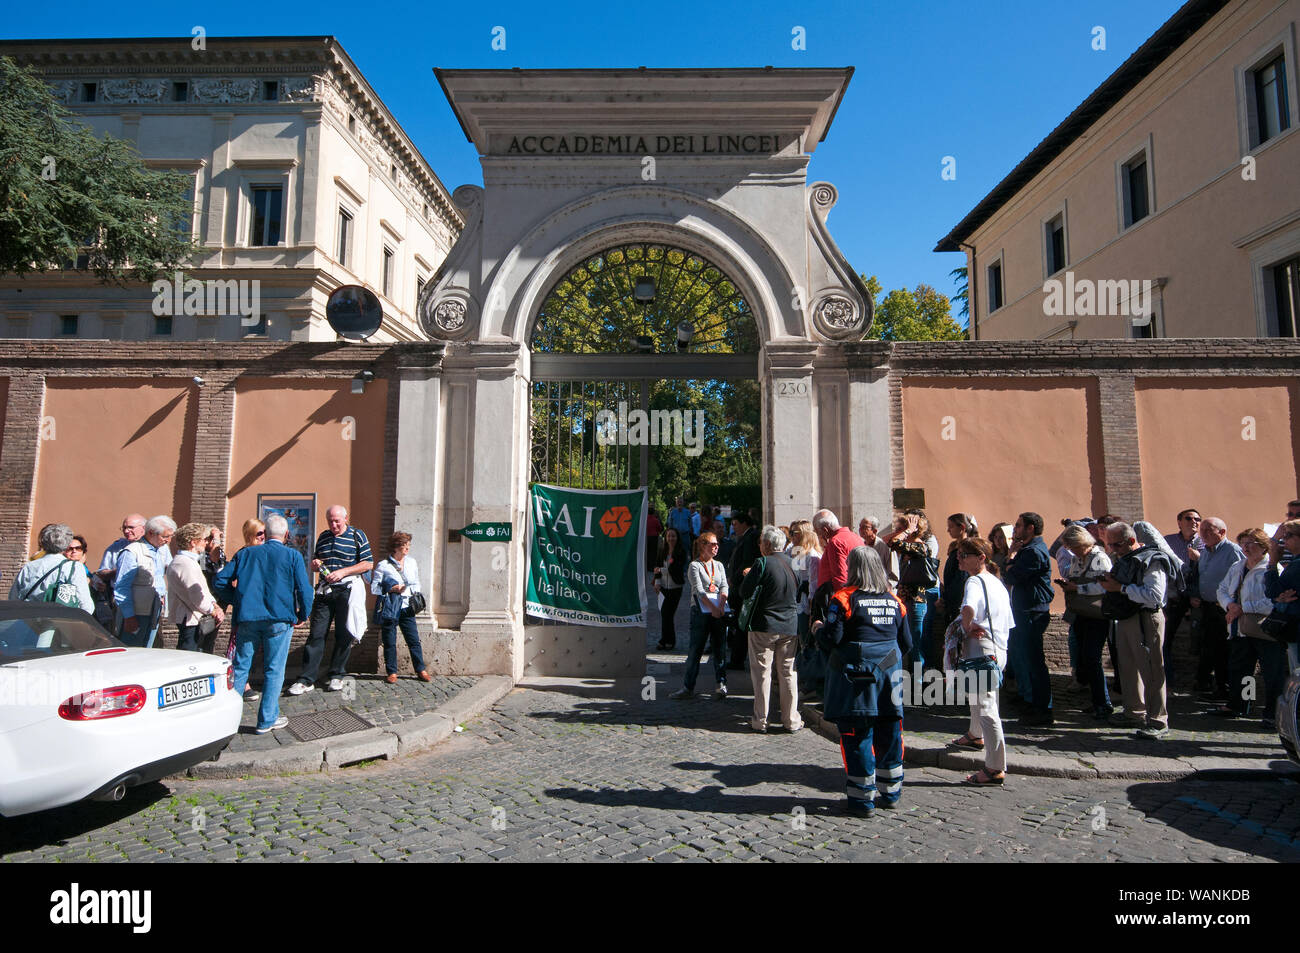 People in queue waiting to visit the Academy of Lincei (Villa Farnesina) during FAI Days in Rome, Lazio, Italy Stock Photo